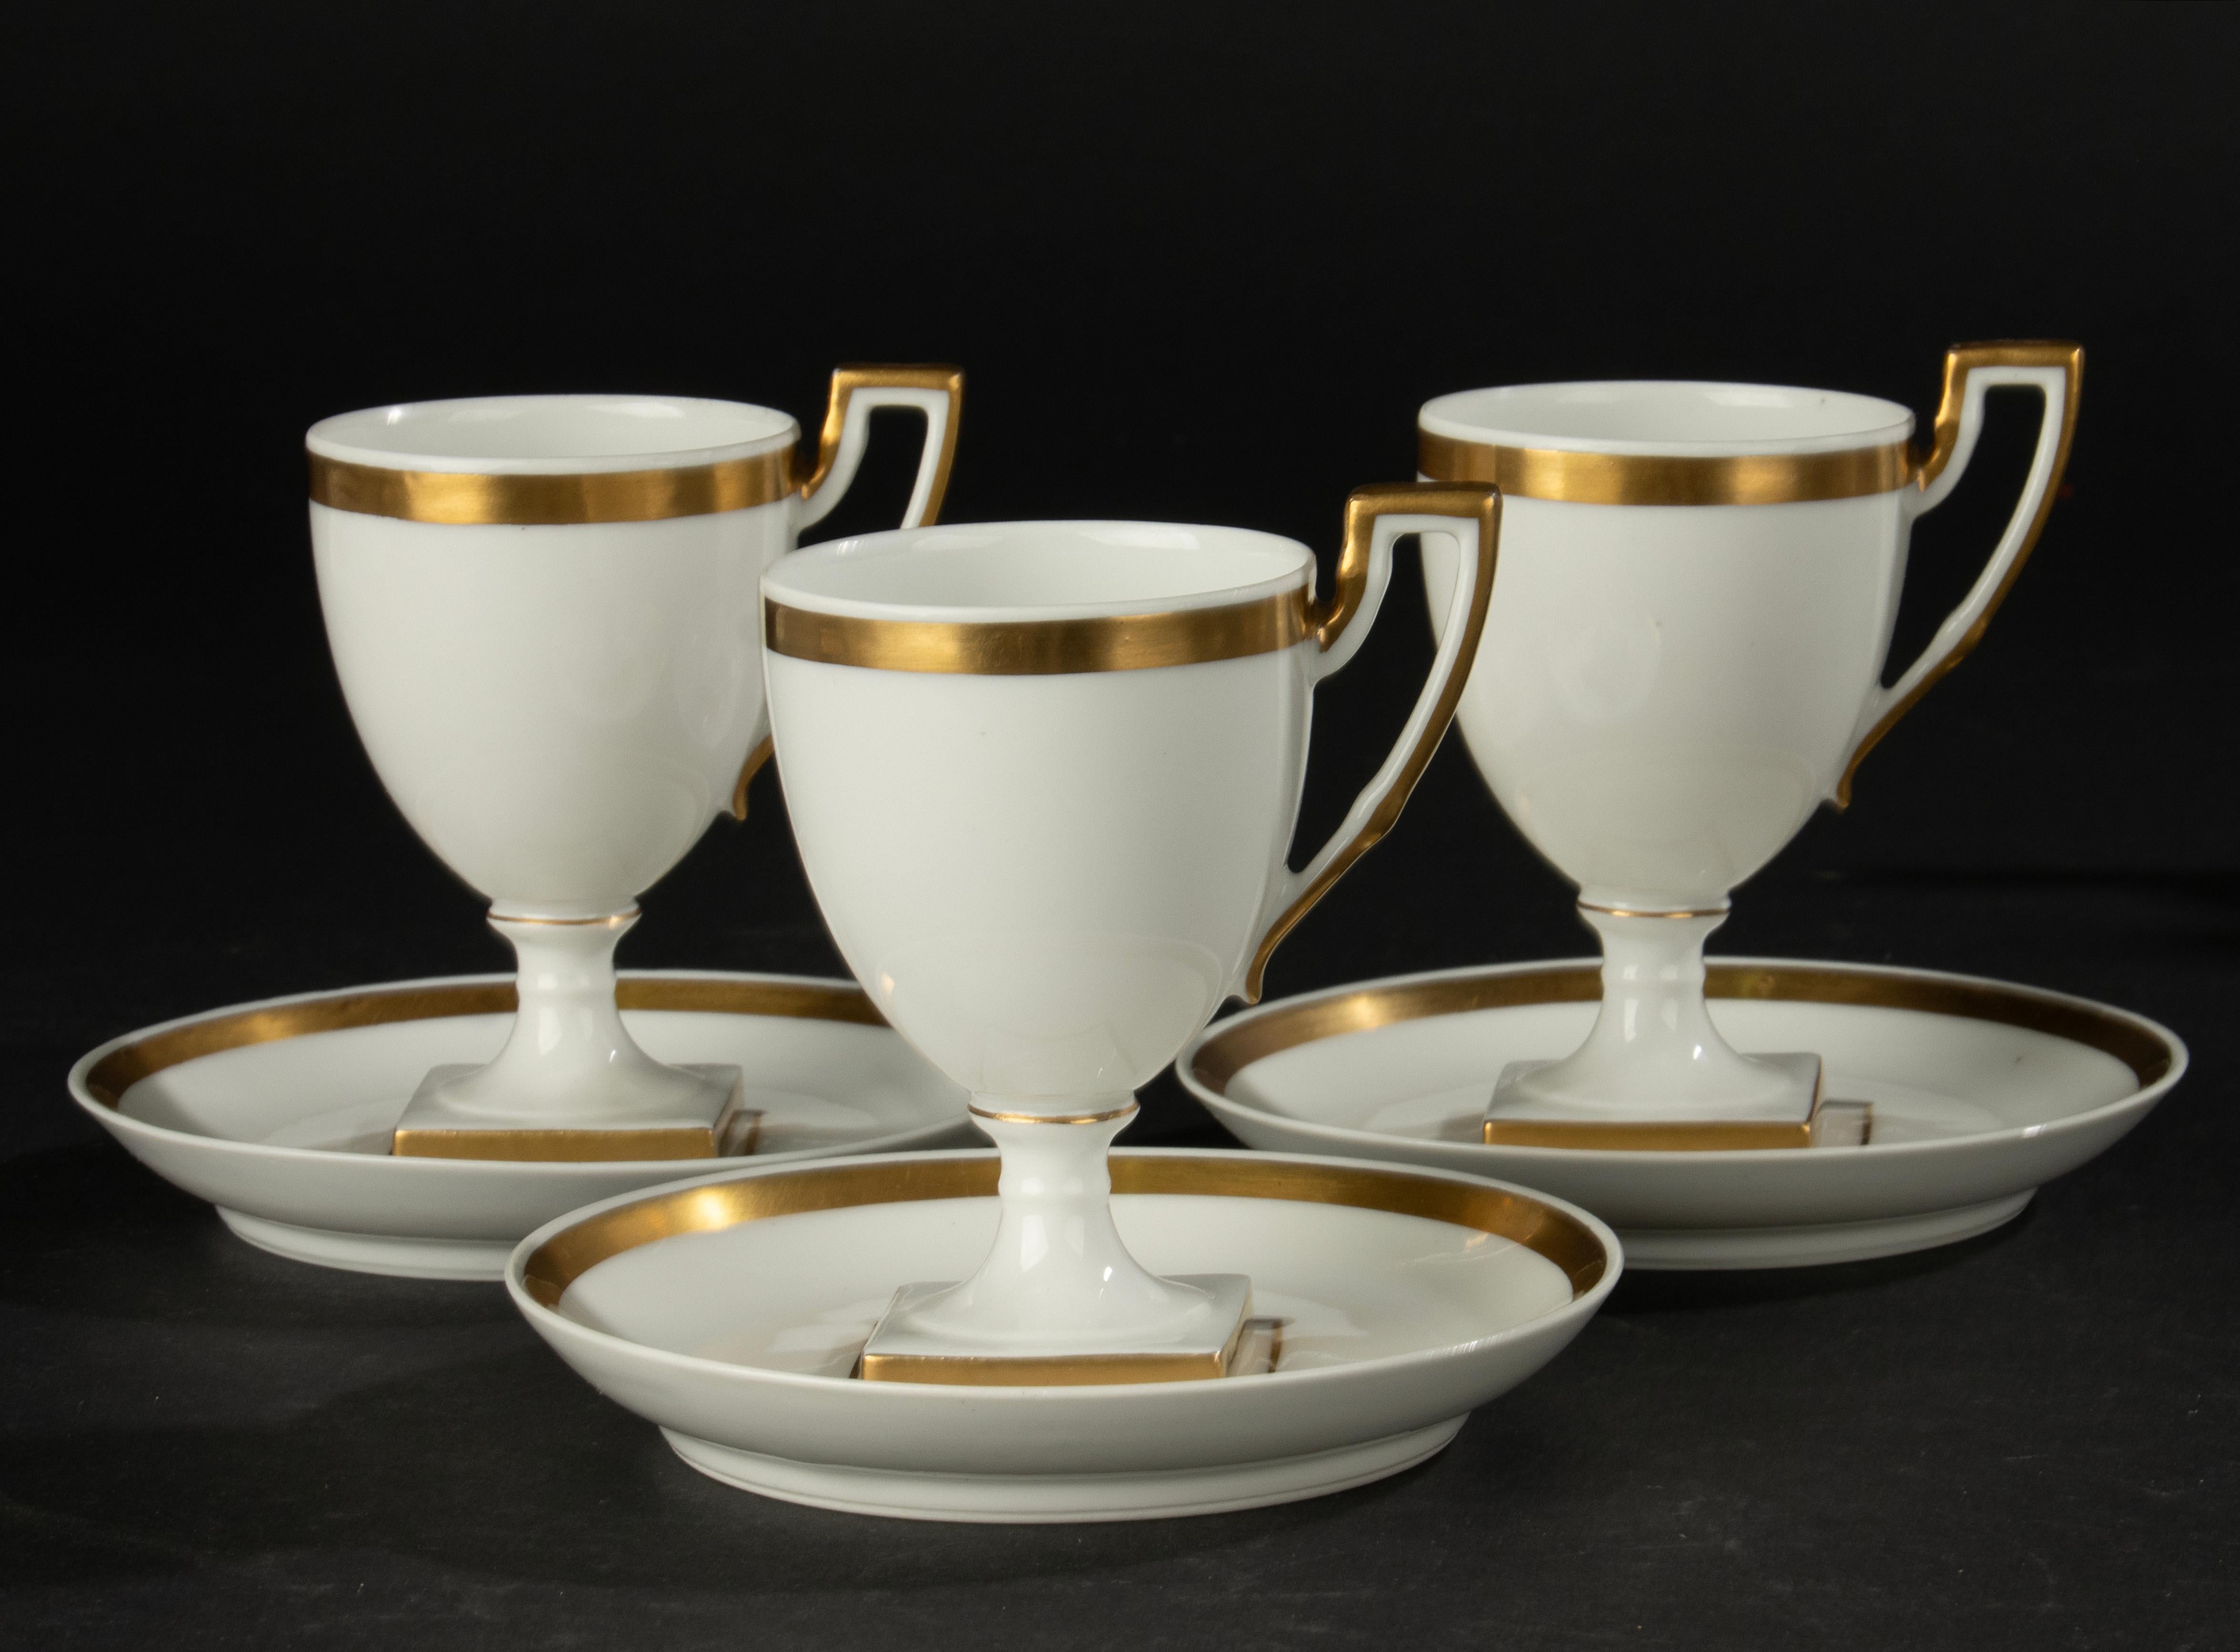 Late 19th Century Porcelain Coffee Set - Paroutaud Frères La Seynie - Limoges   In Good Condition For Sale In Casteren, Noord-Brabant